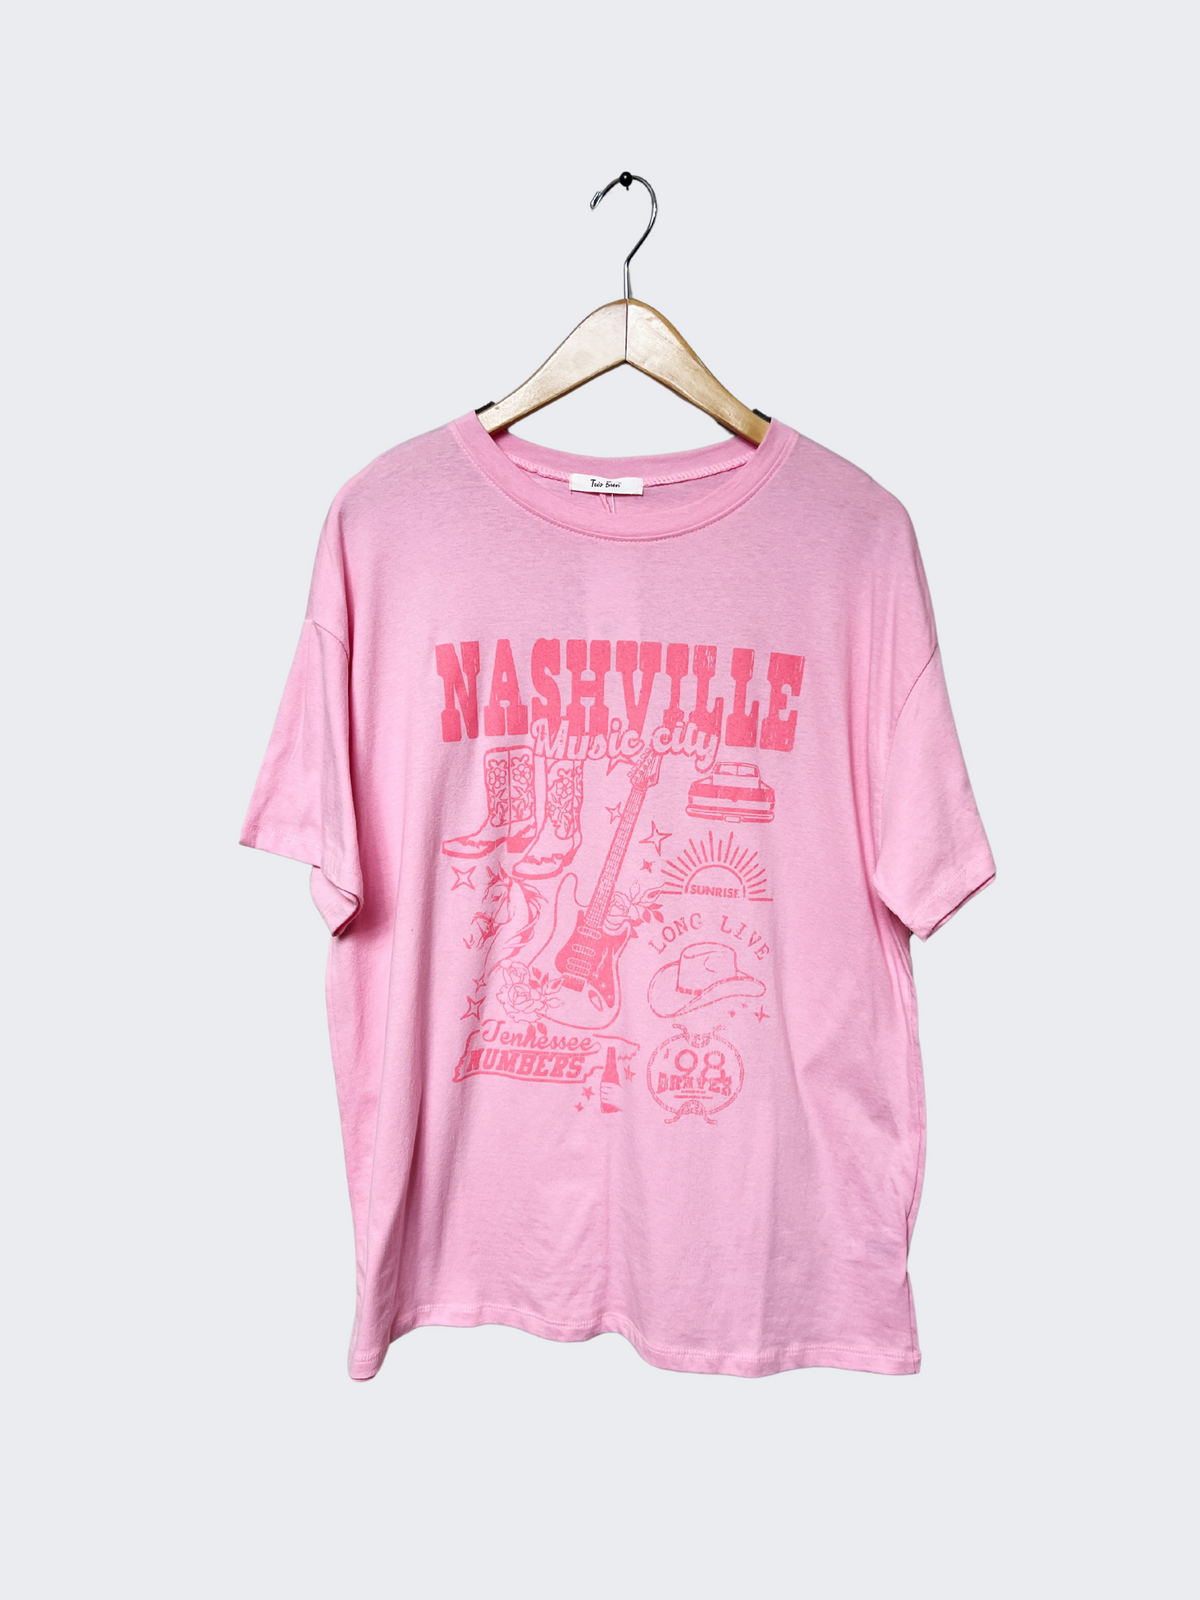 nashville tennessee music city pink tee-front view